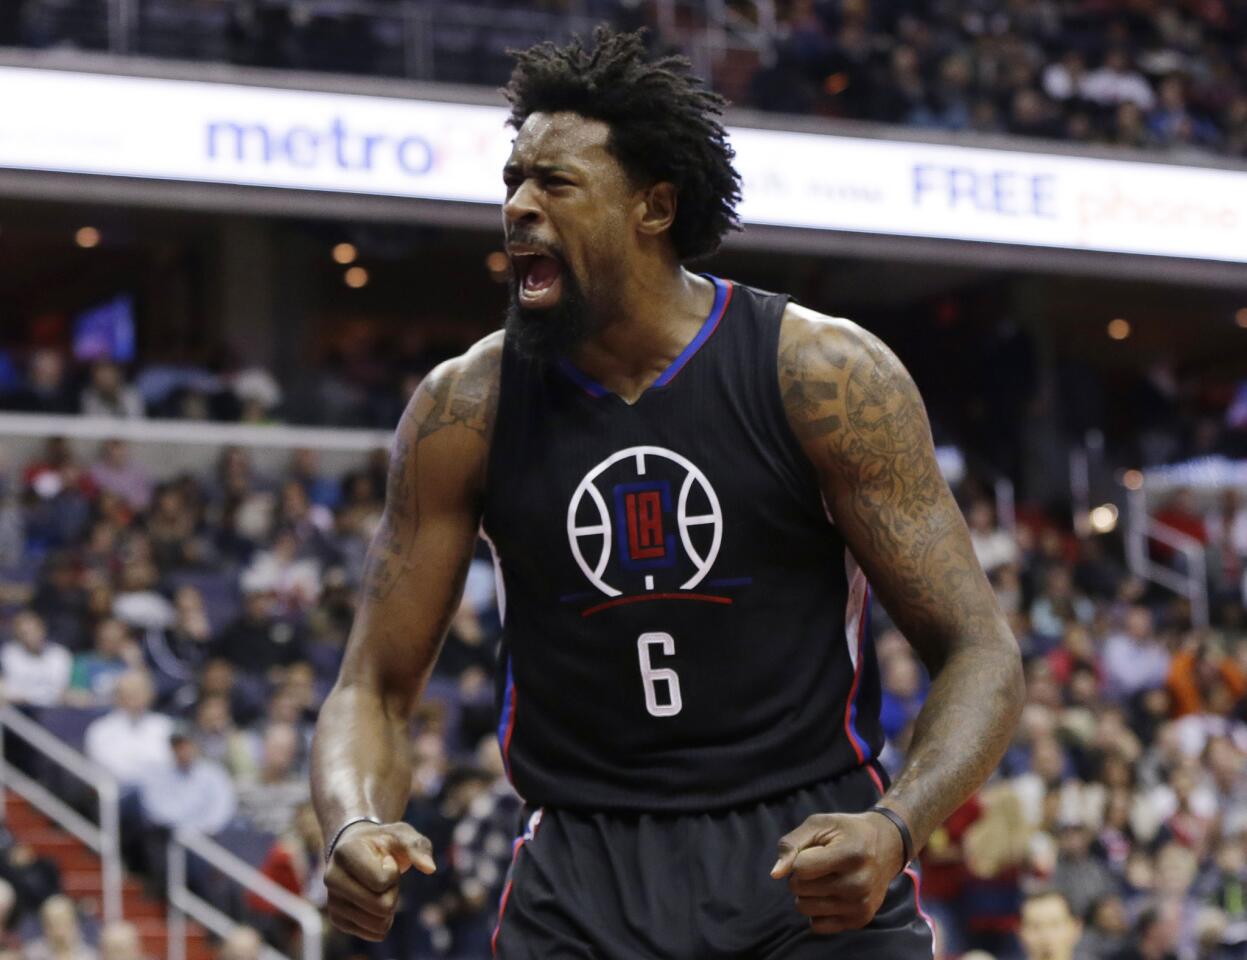 Chris Paul and DeAndre Jordan step up and Clippers step lively in 108-91 victory over Wizards